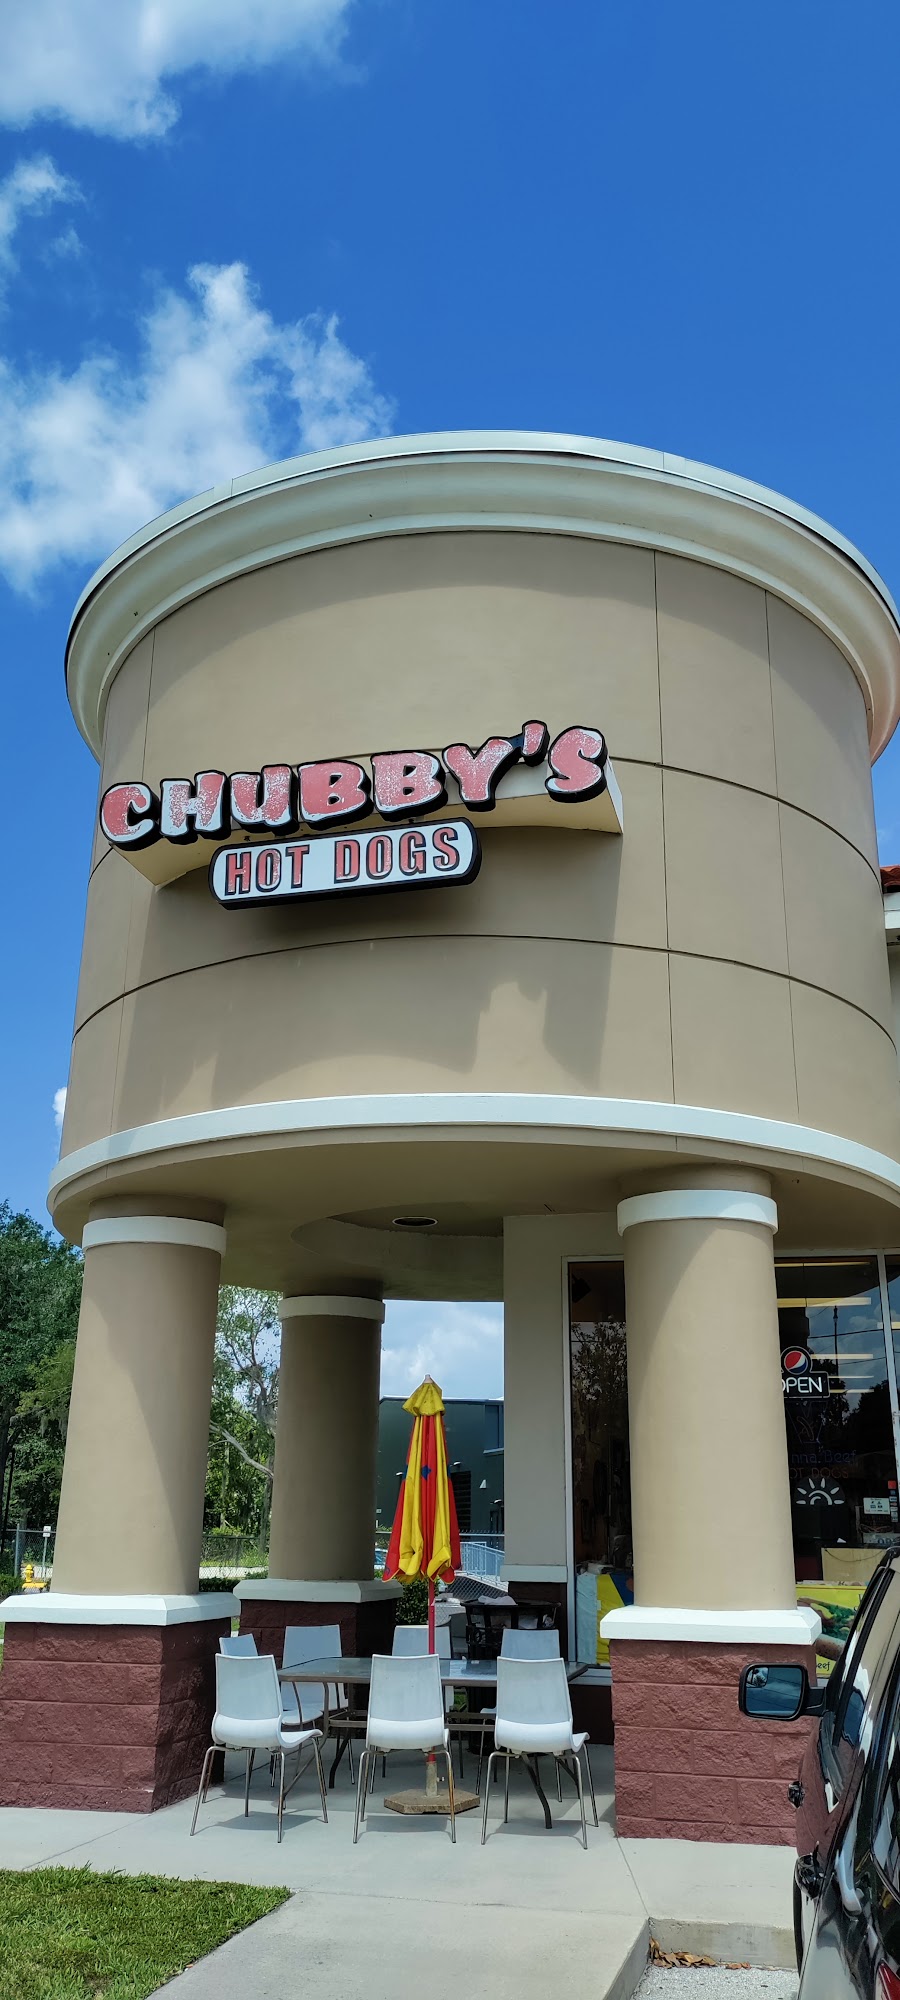 Chubby's Hot Dogs